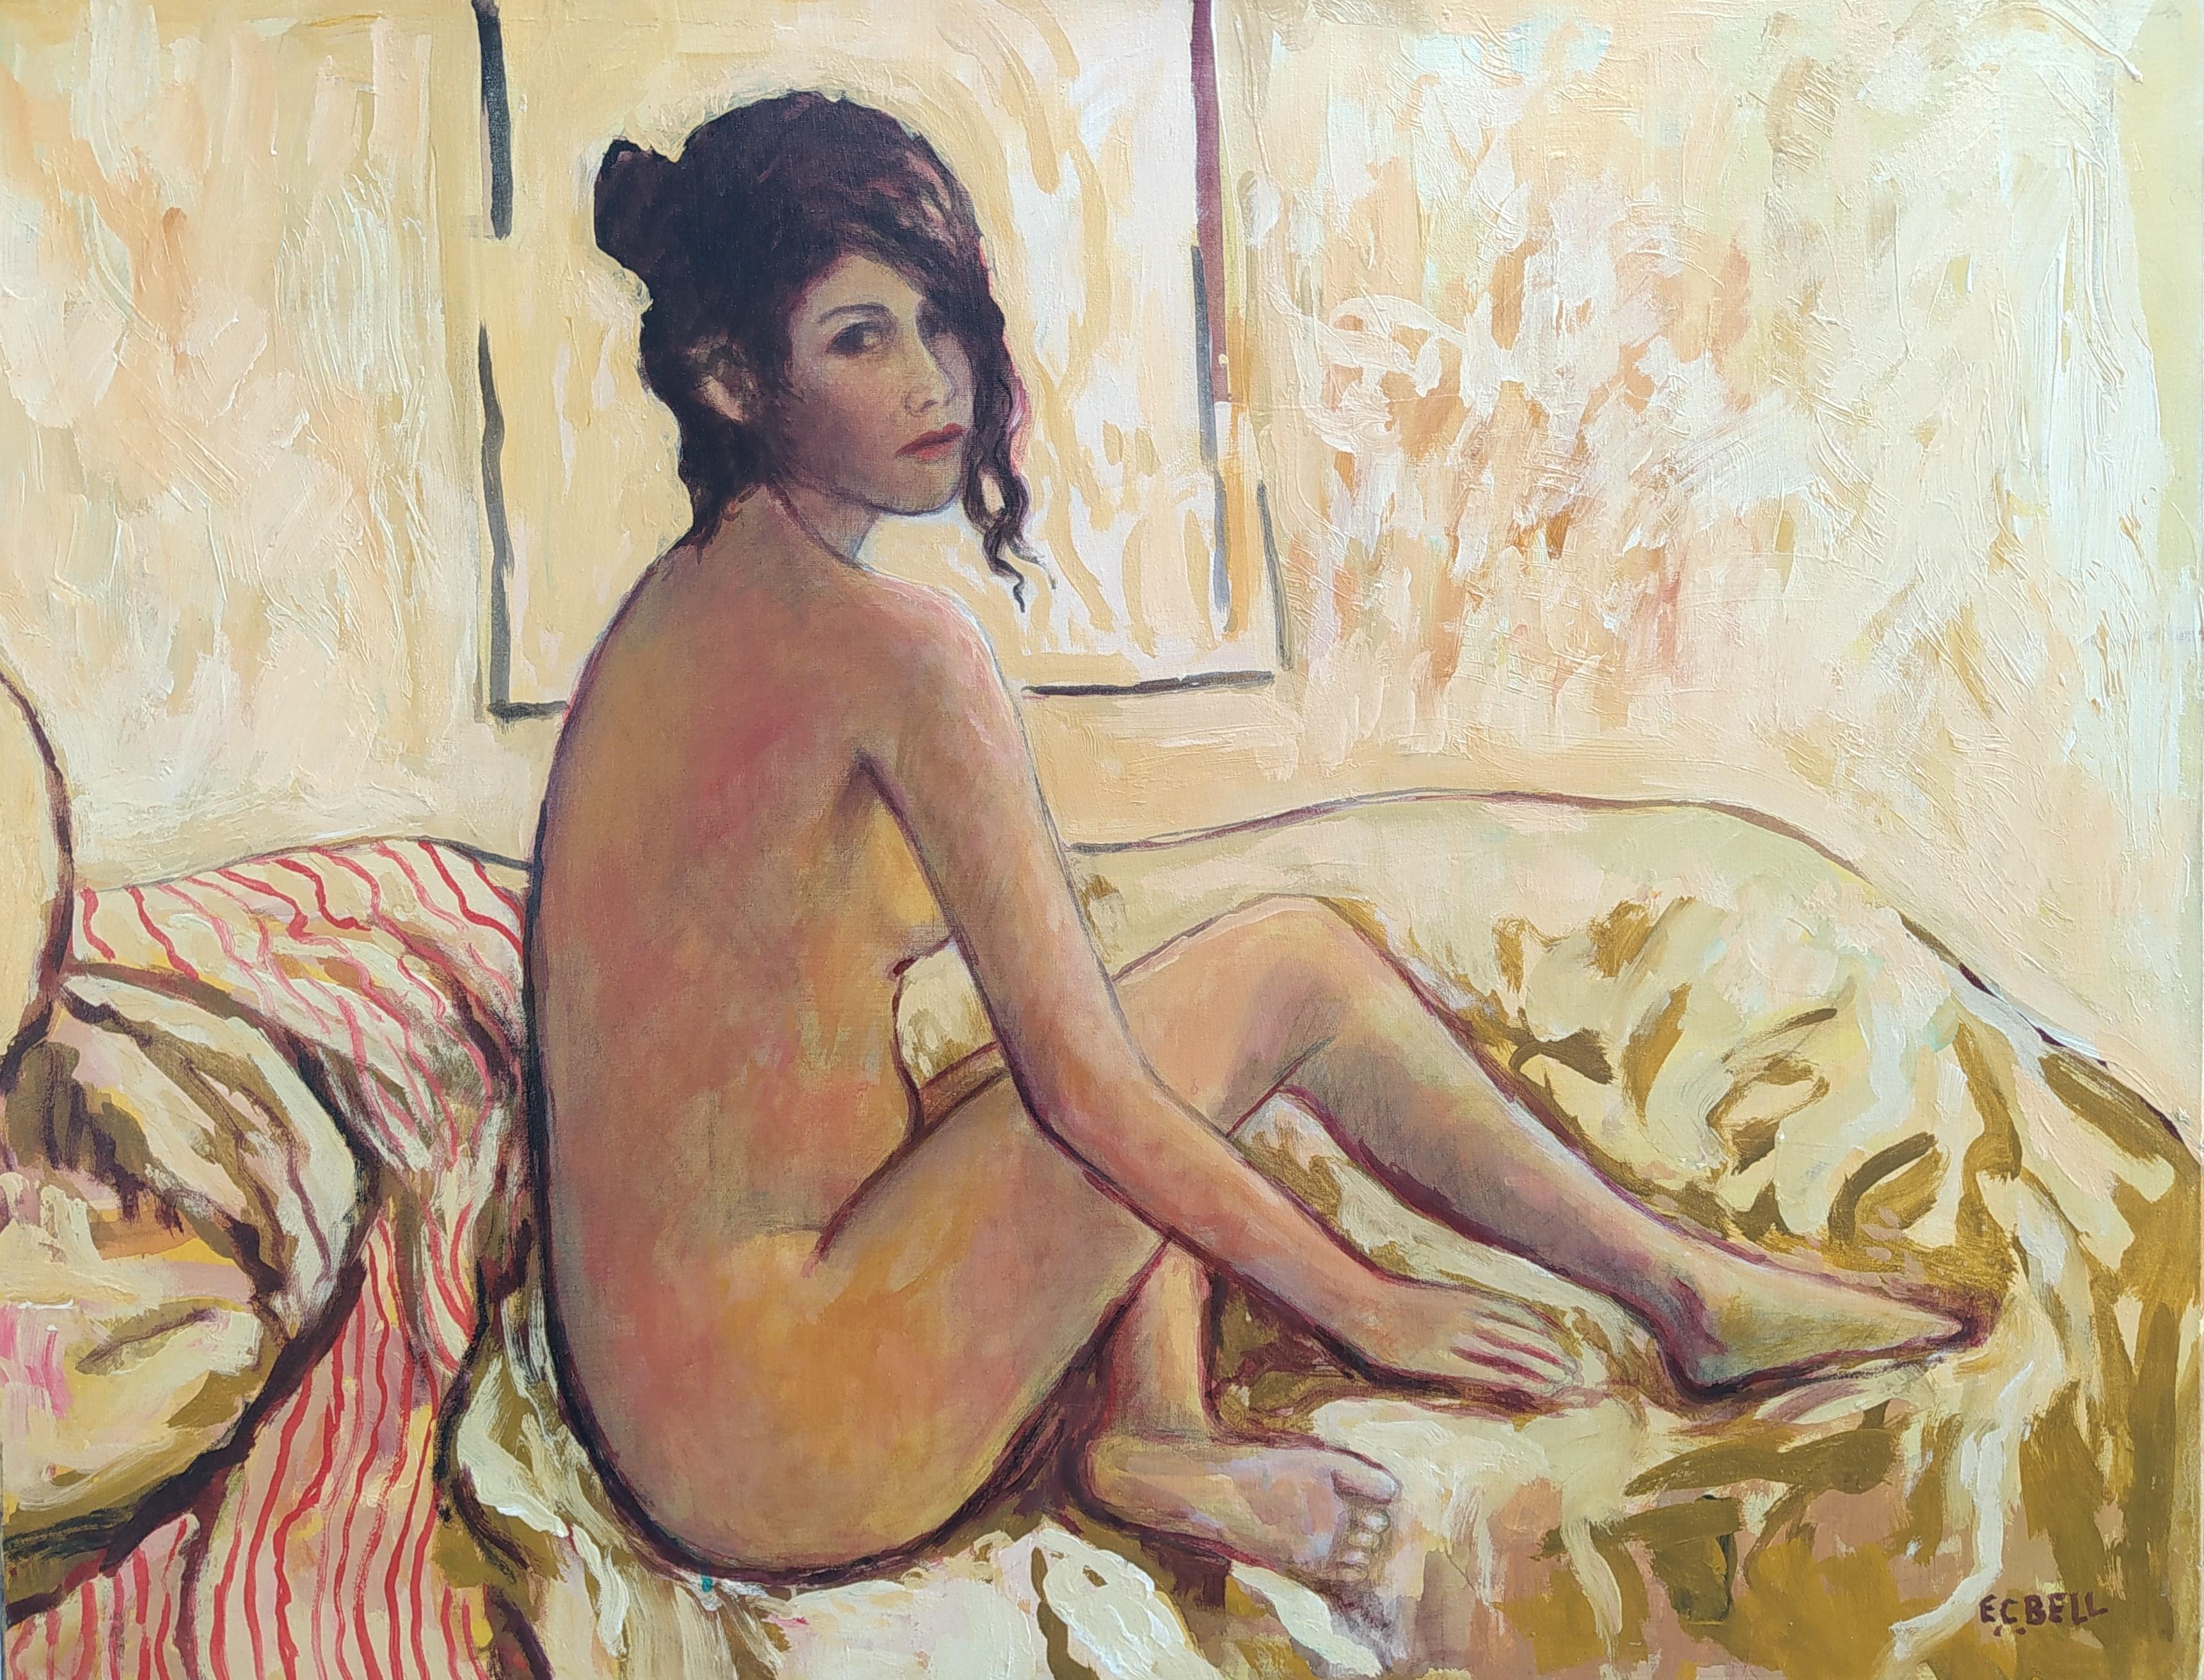 E.C. Bell Nude Painting - "Valery" - Horizontal indoor female nude in yellow ochre and white. 